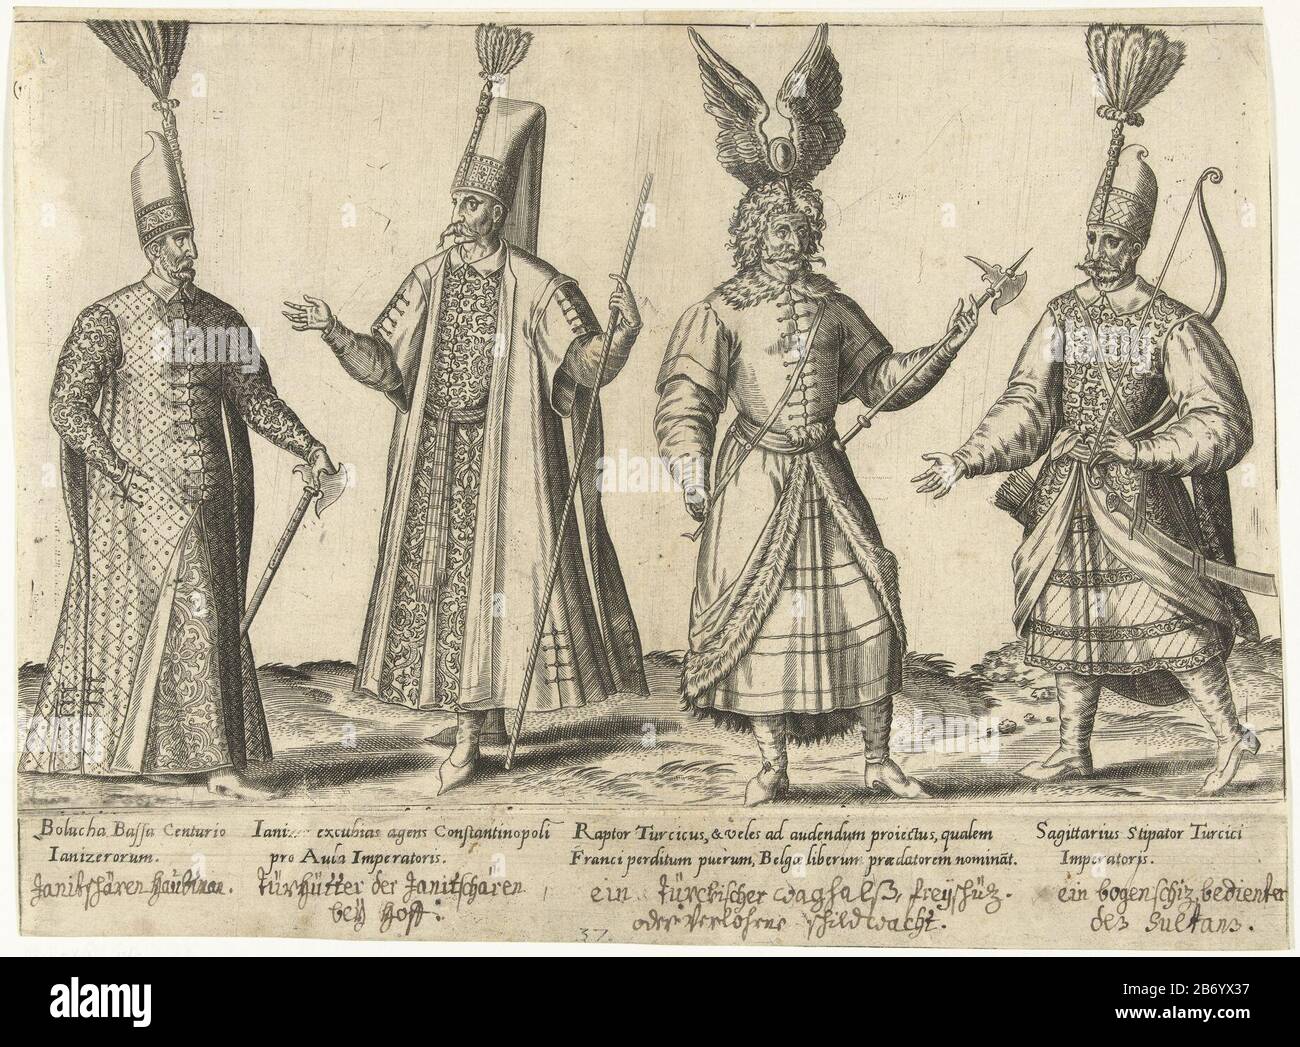 Kleding van Ottomaanse soldaten rond 1580 Traditionele kleding van over de  hele wereld rond 1580 (serietitel) Print out a book about sixteenth century  clothing around 1580. Four soldiers from the Ottoman army.